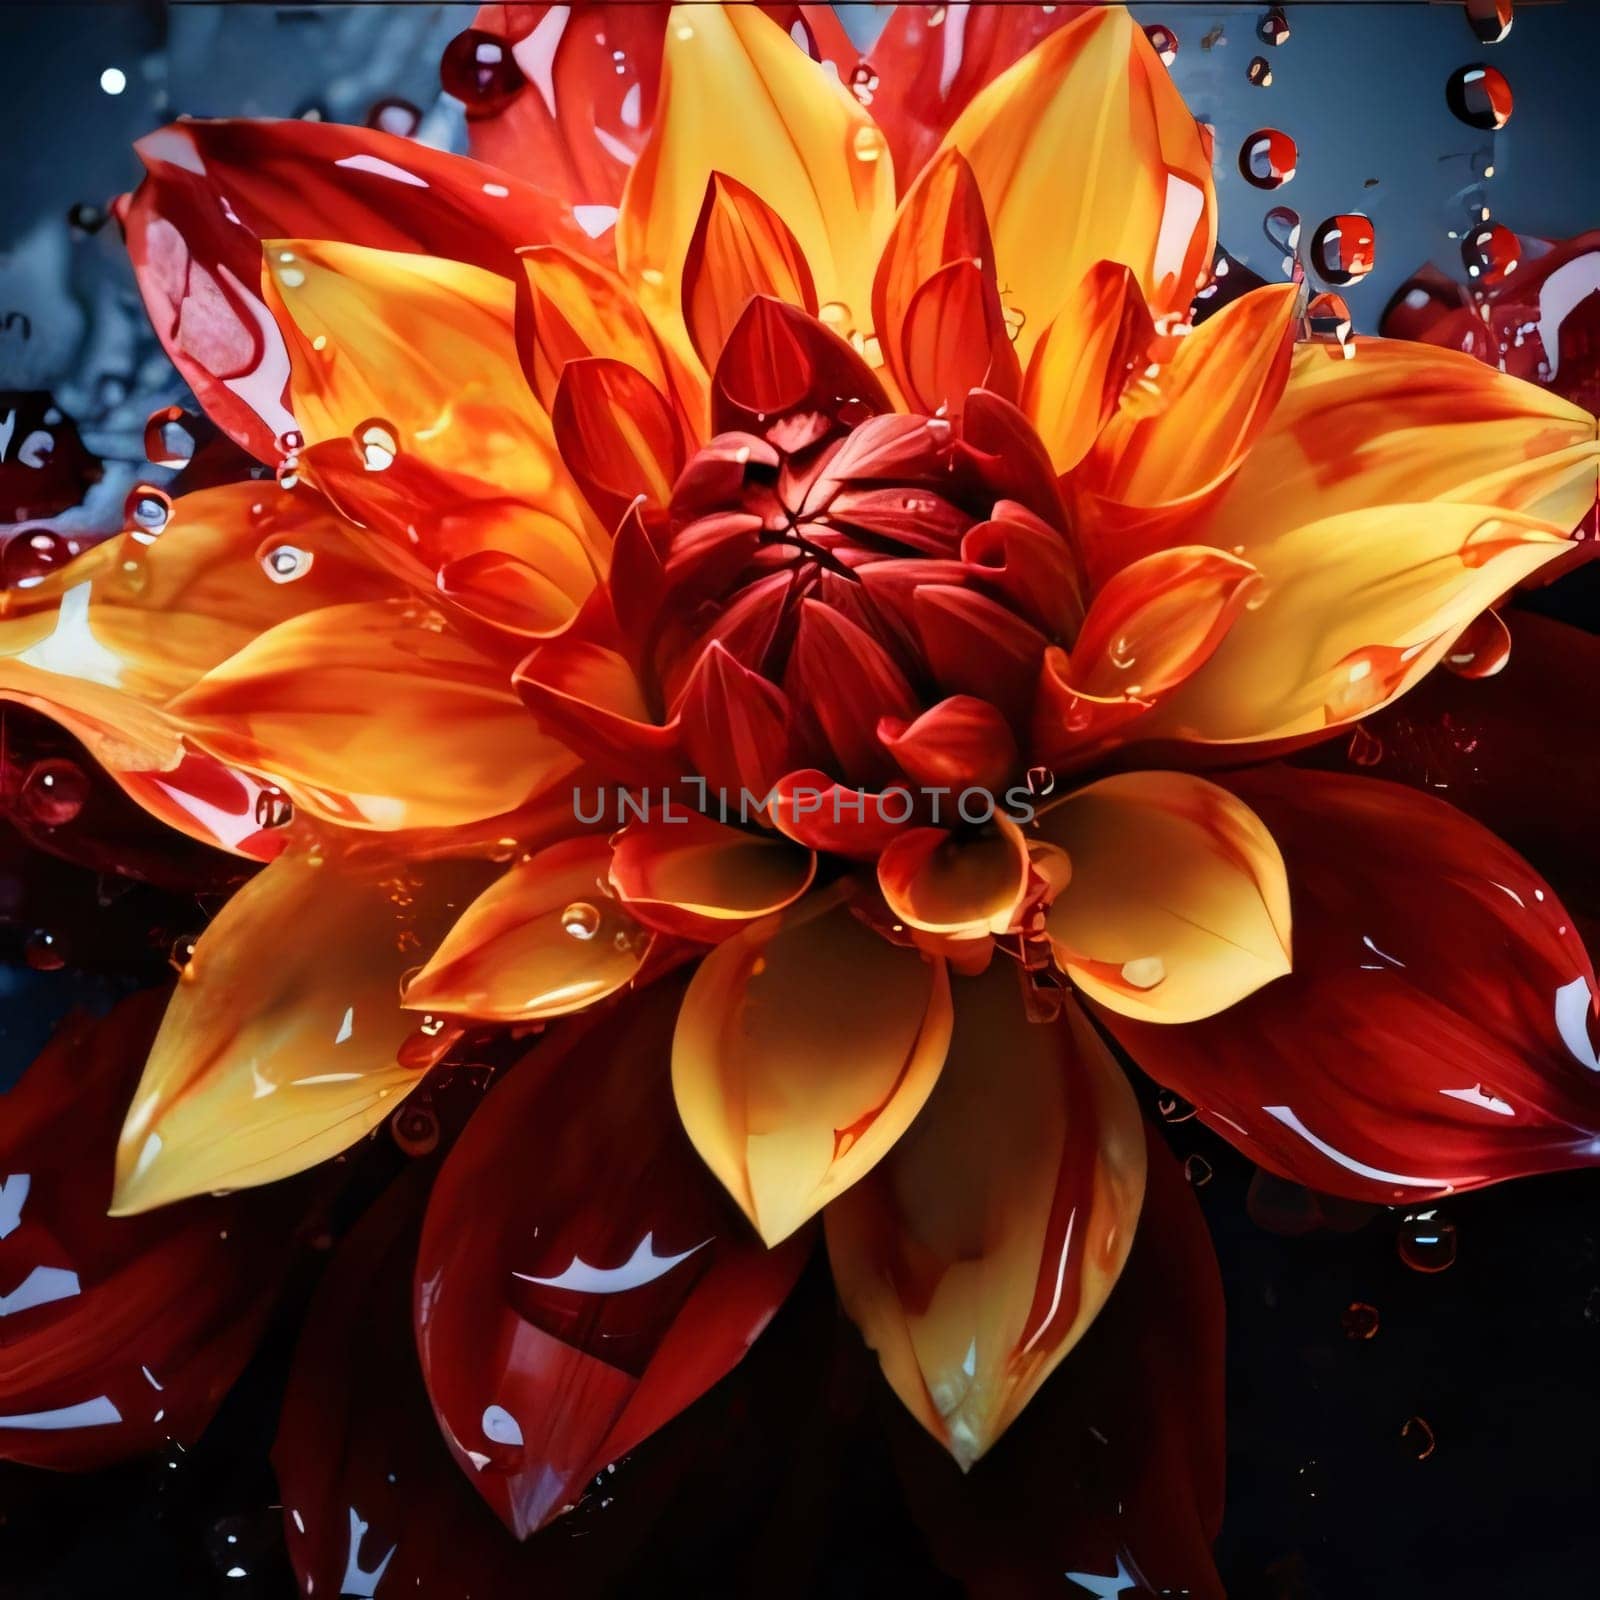 Orange dahlia flower up close with drops of water, rain. Flowering flowers, a symbol of spring, new life. by ThemesS